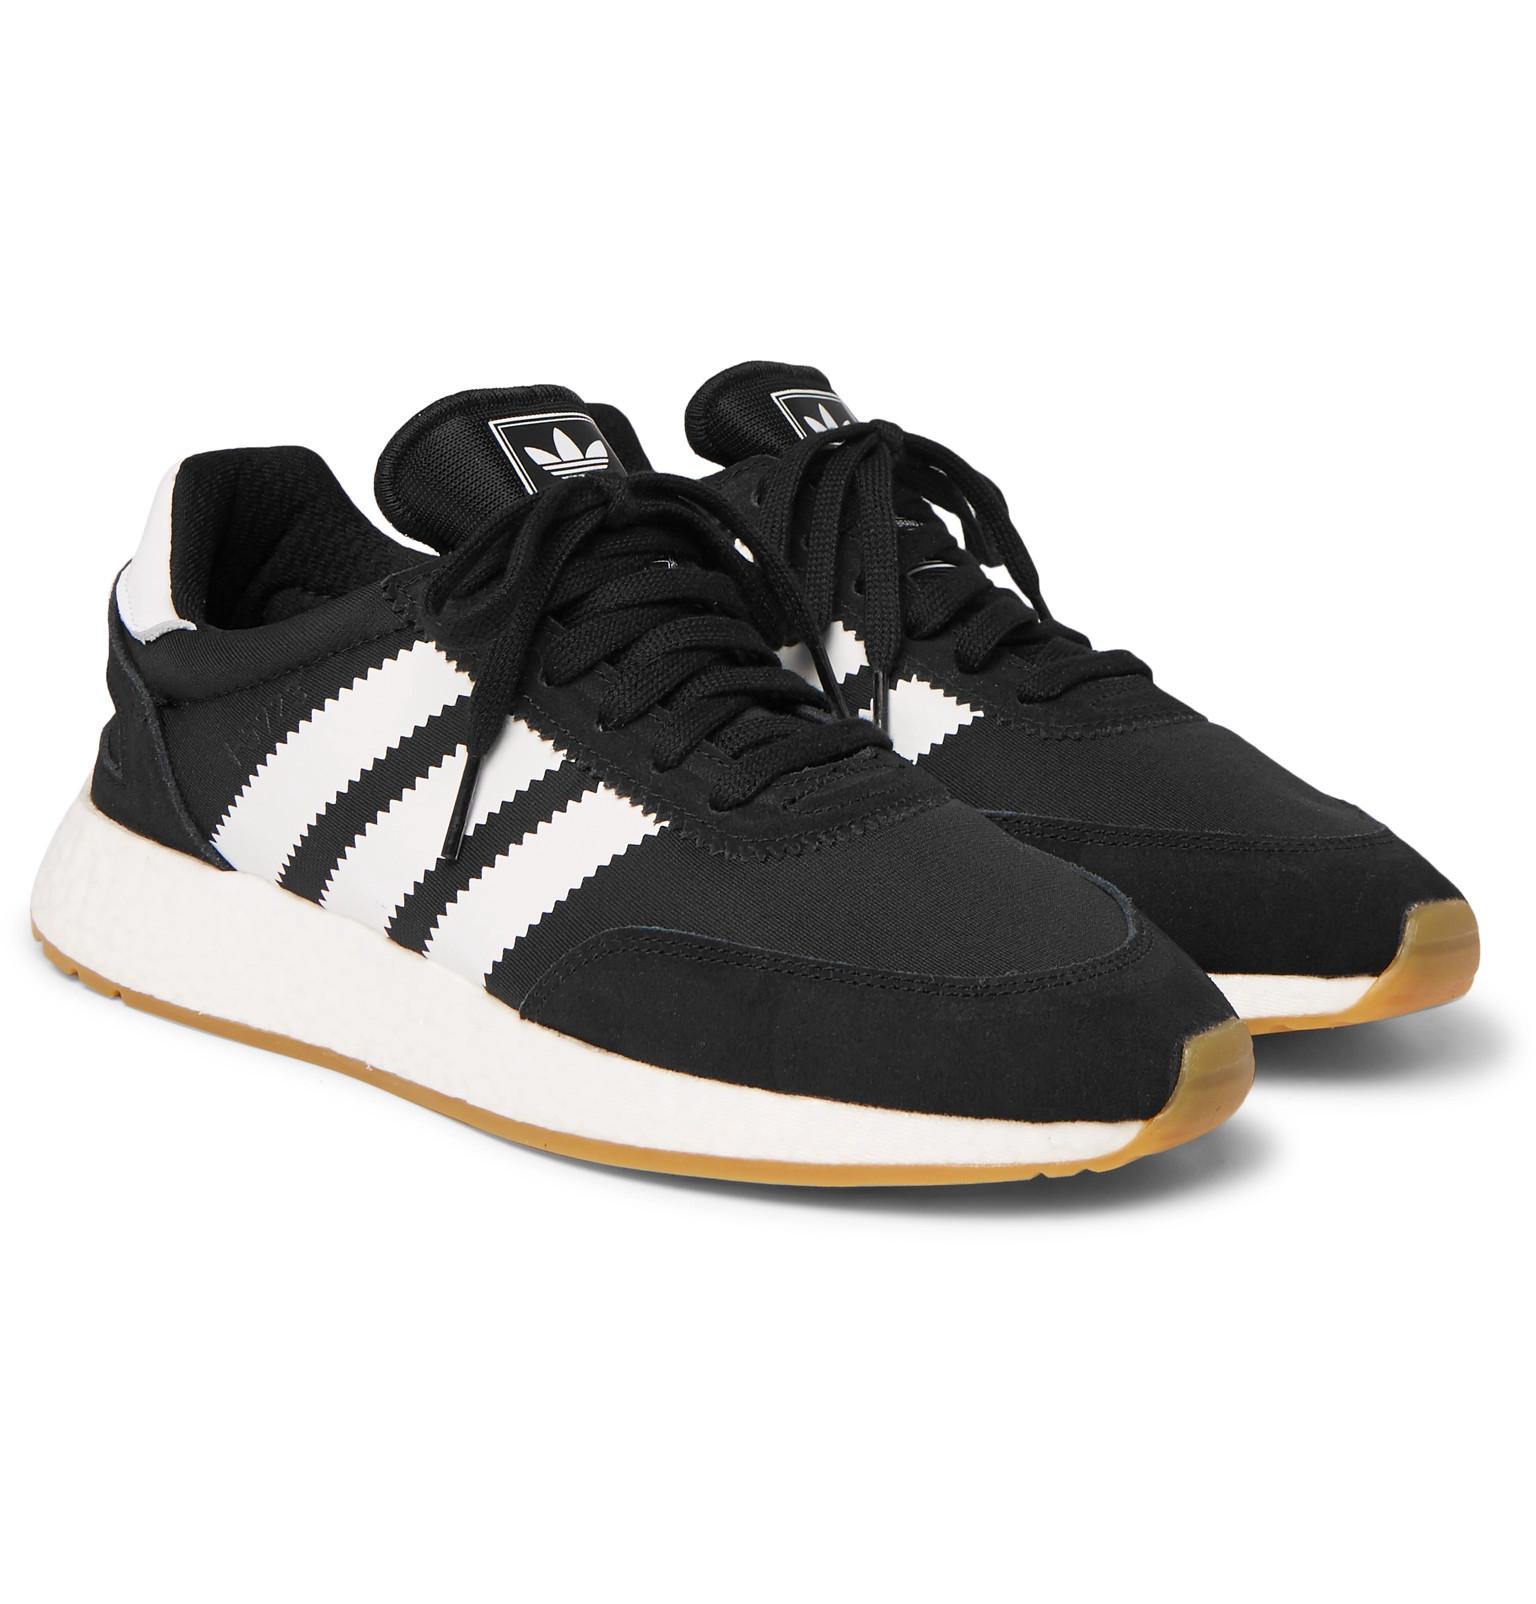 adidas Originals I-5293 Leather And Suede-trimmed Neoprene Sneakers in  White/Black (Black) for Men - Save 41% - Lyst